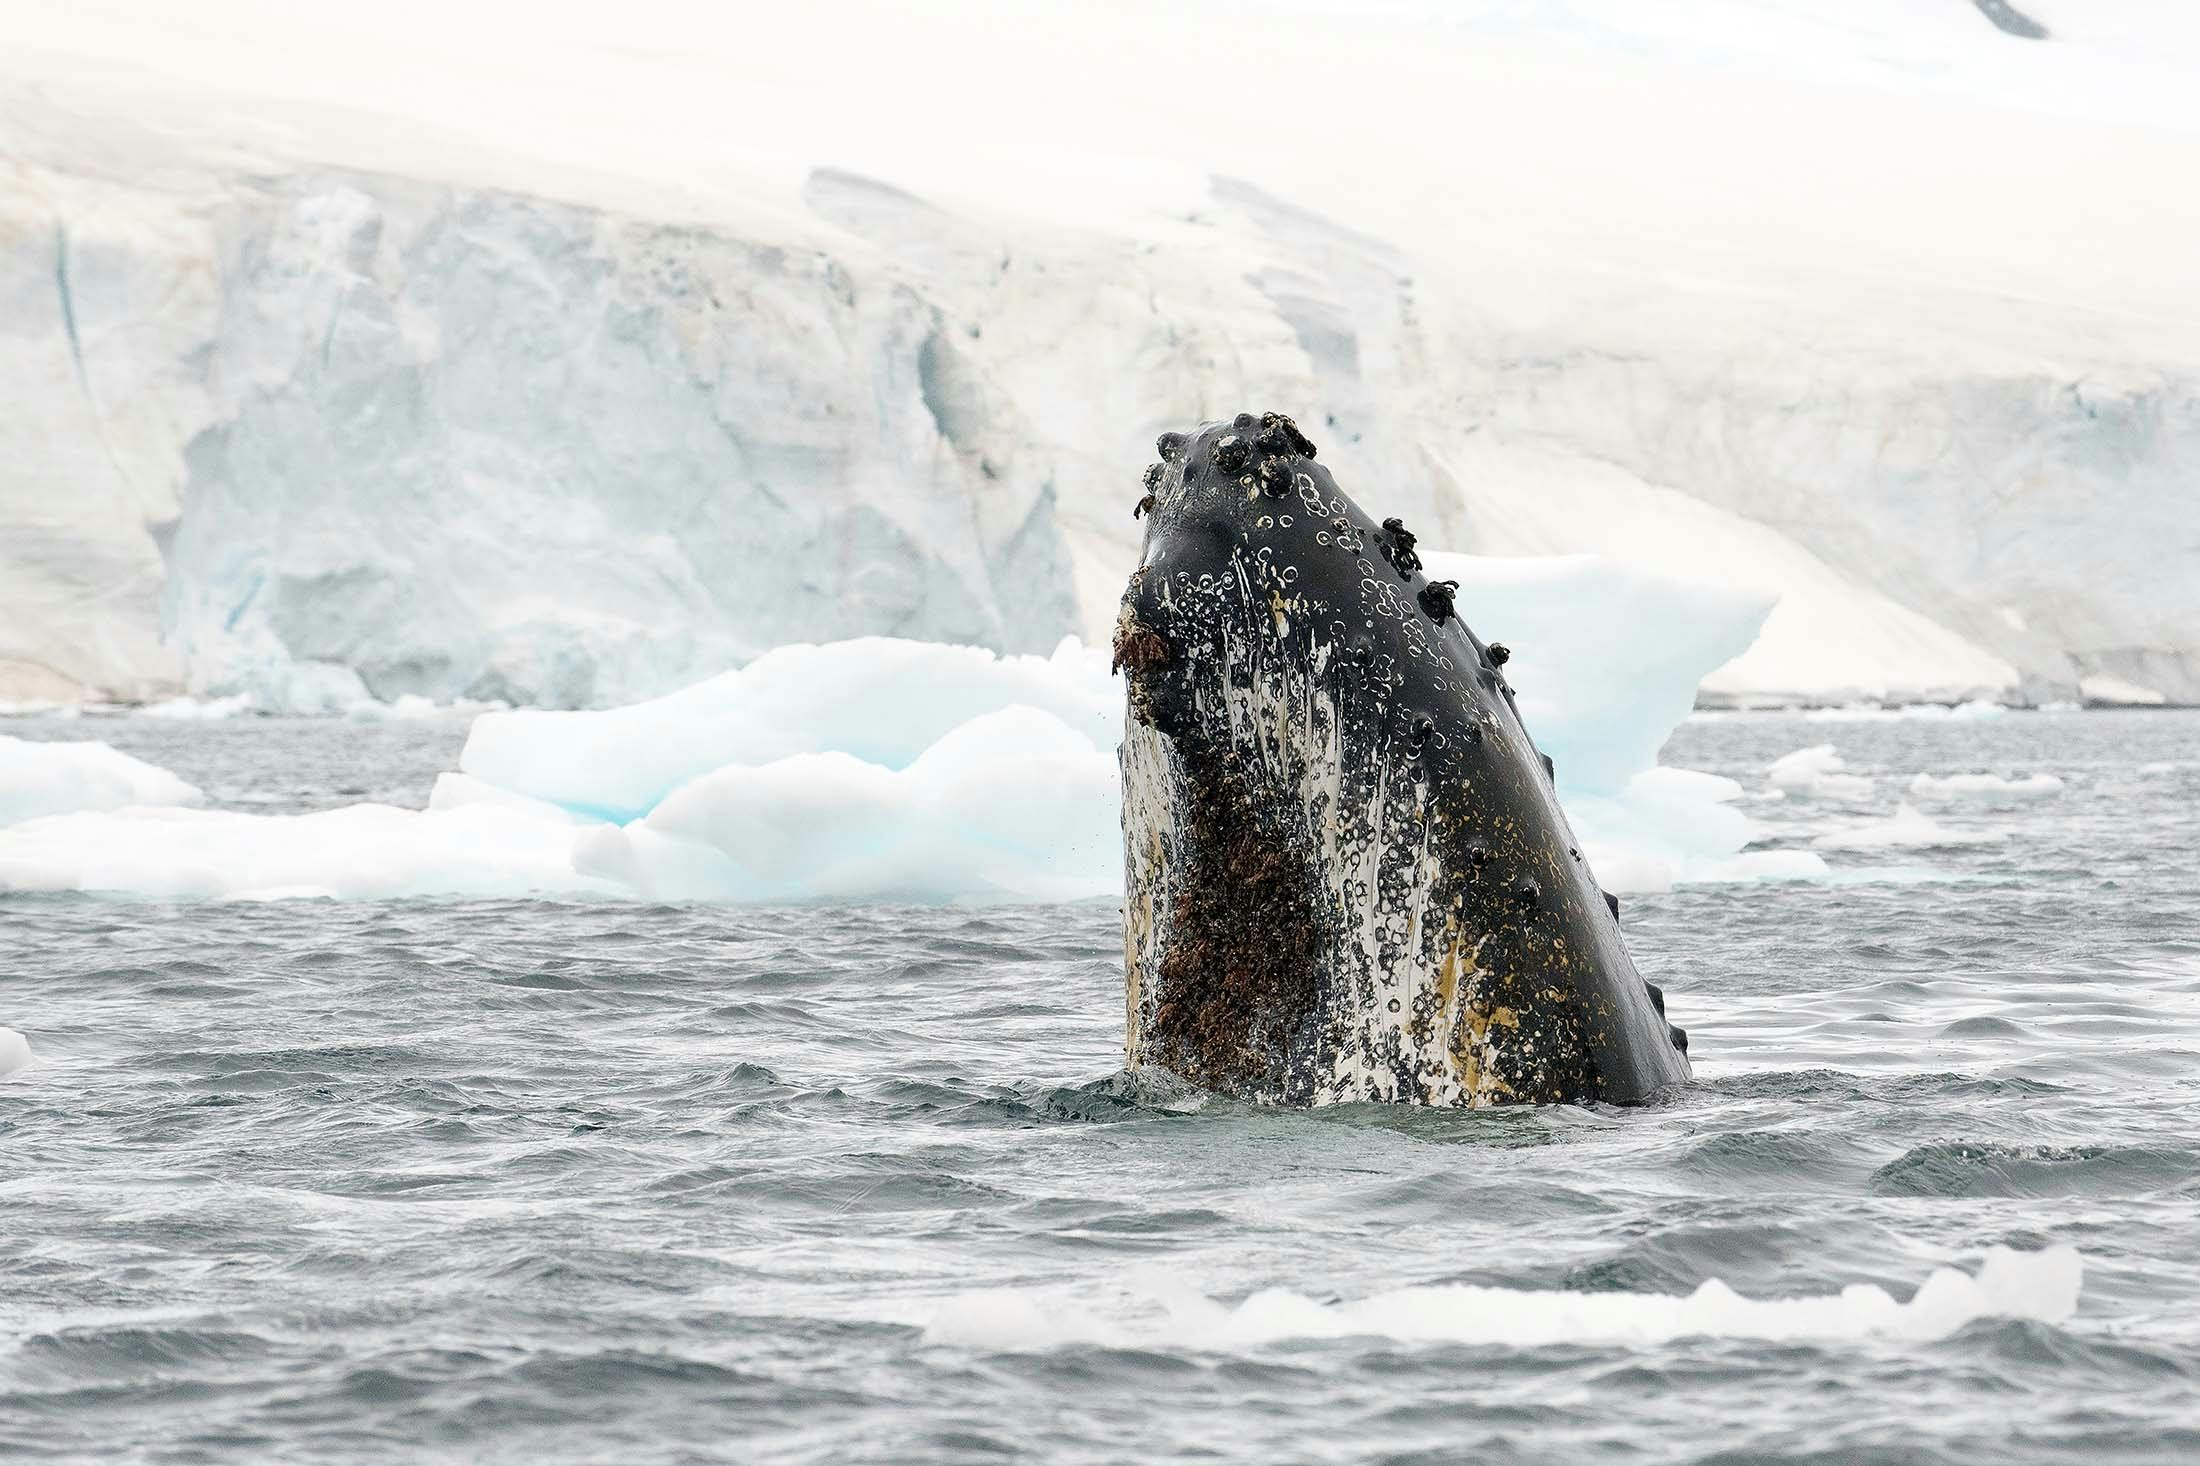 There are few encounters as breathtaking as "spyhopping" humpback whales in Antarctica.